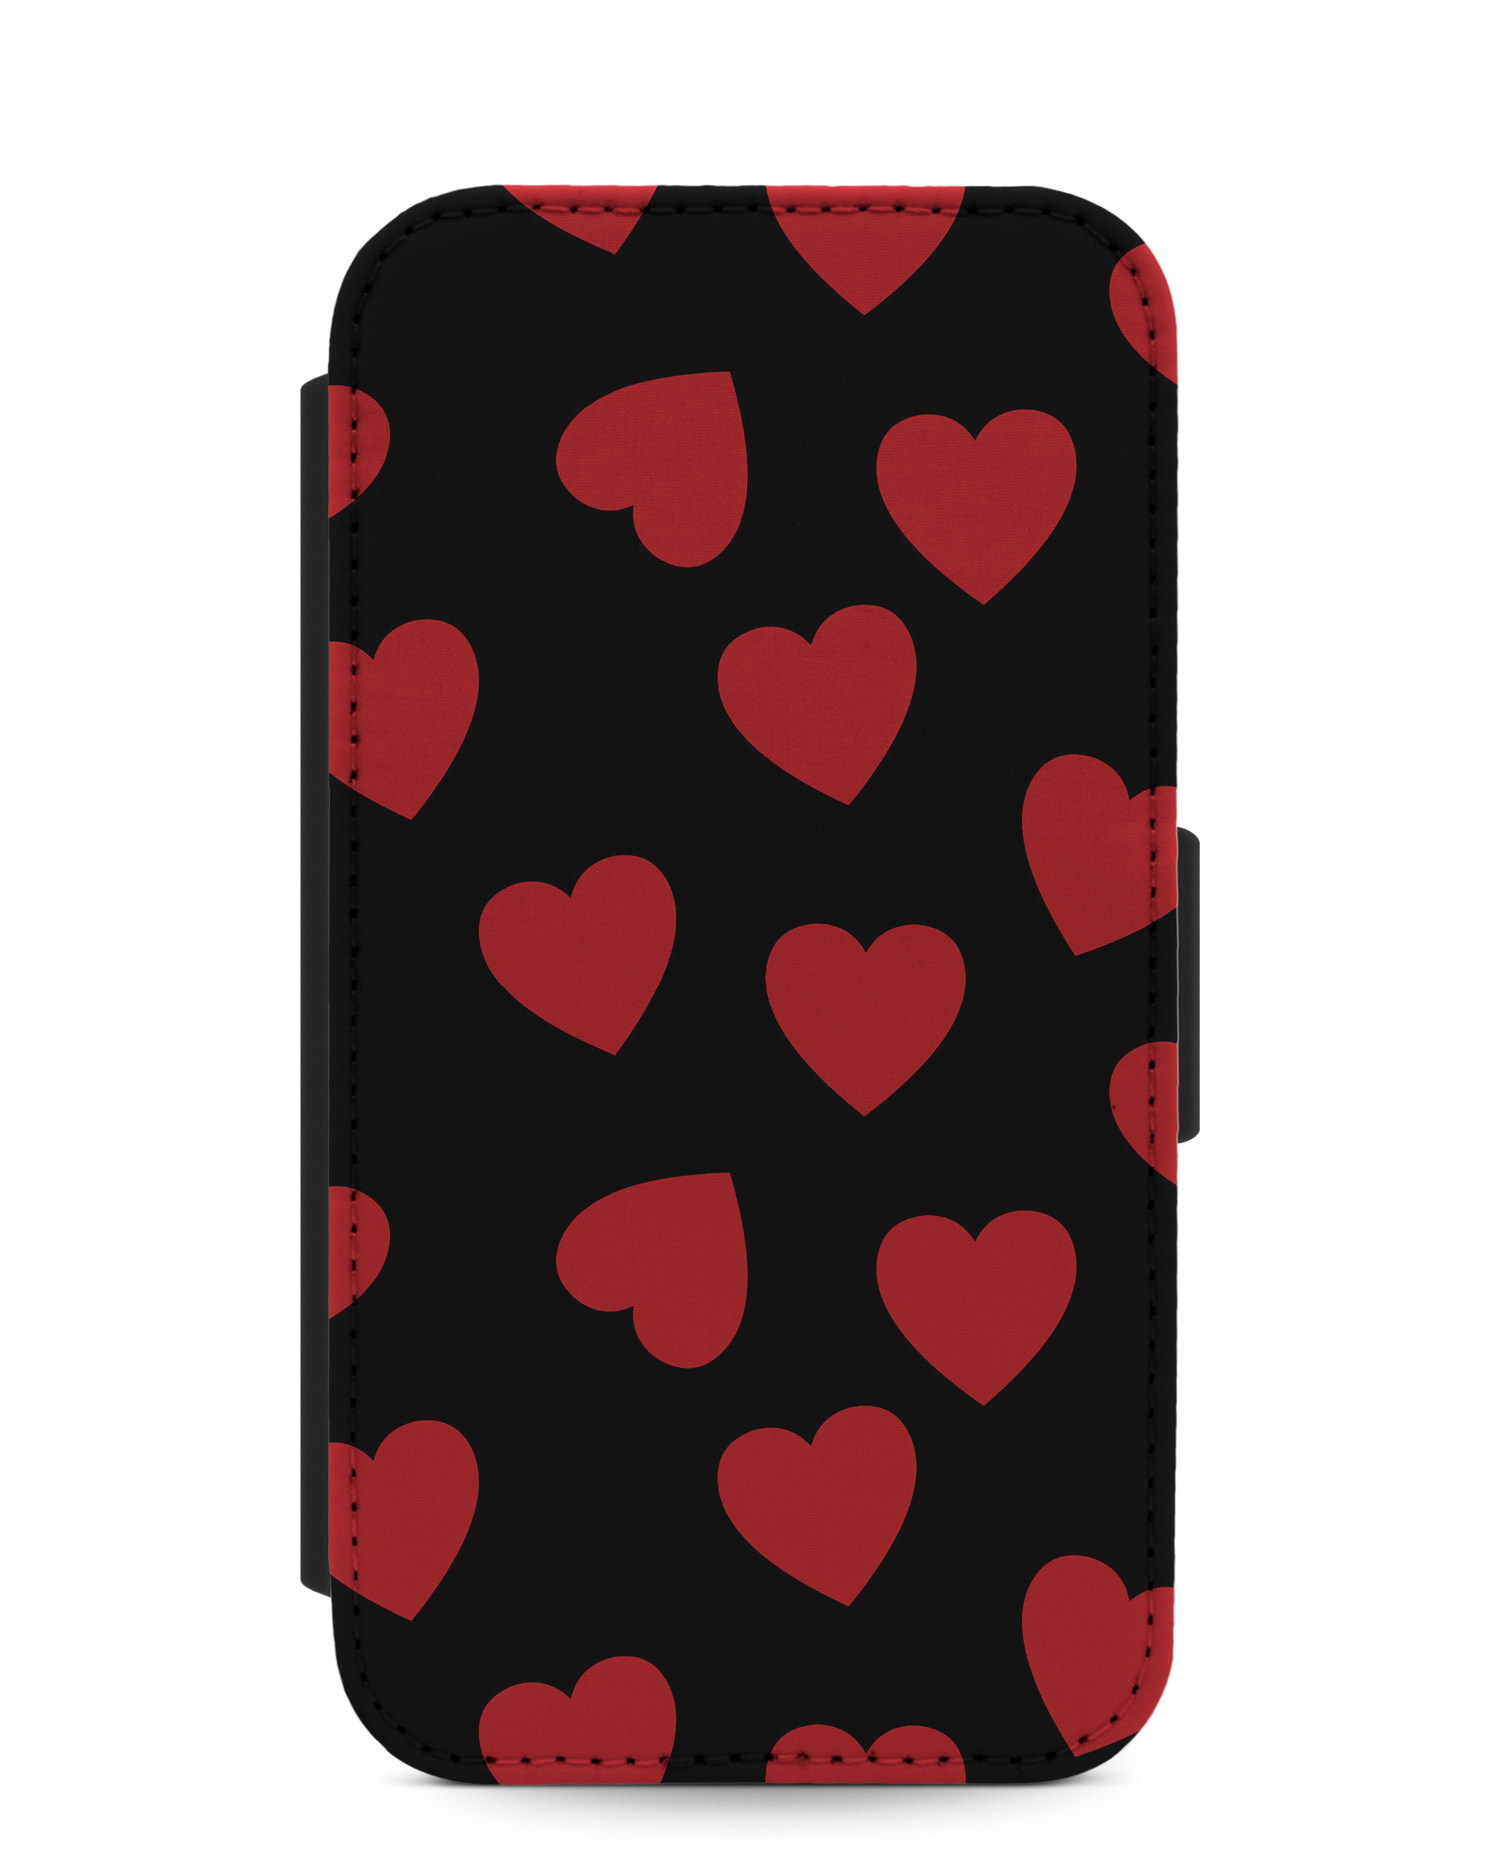 Repeating Hearts Handy Klapphülle Apple iPhone X, Apple iPhone XS: Vorderansicht